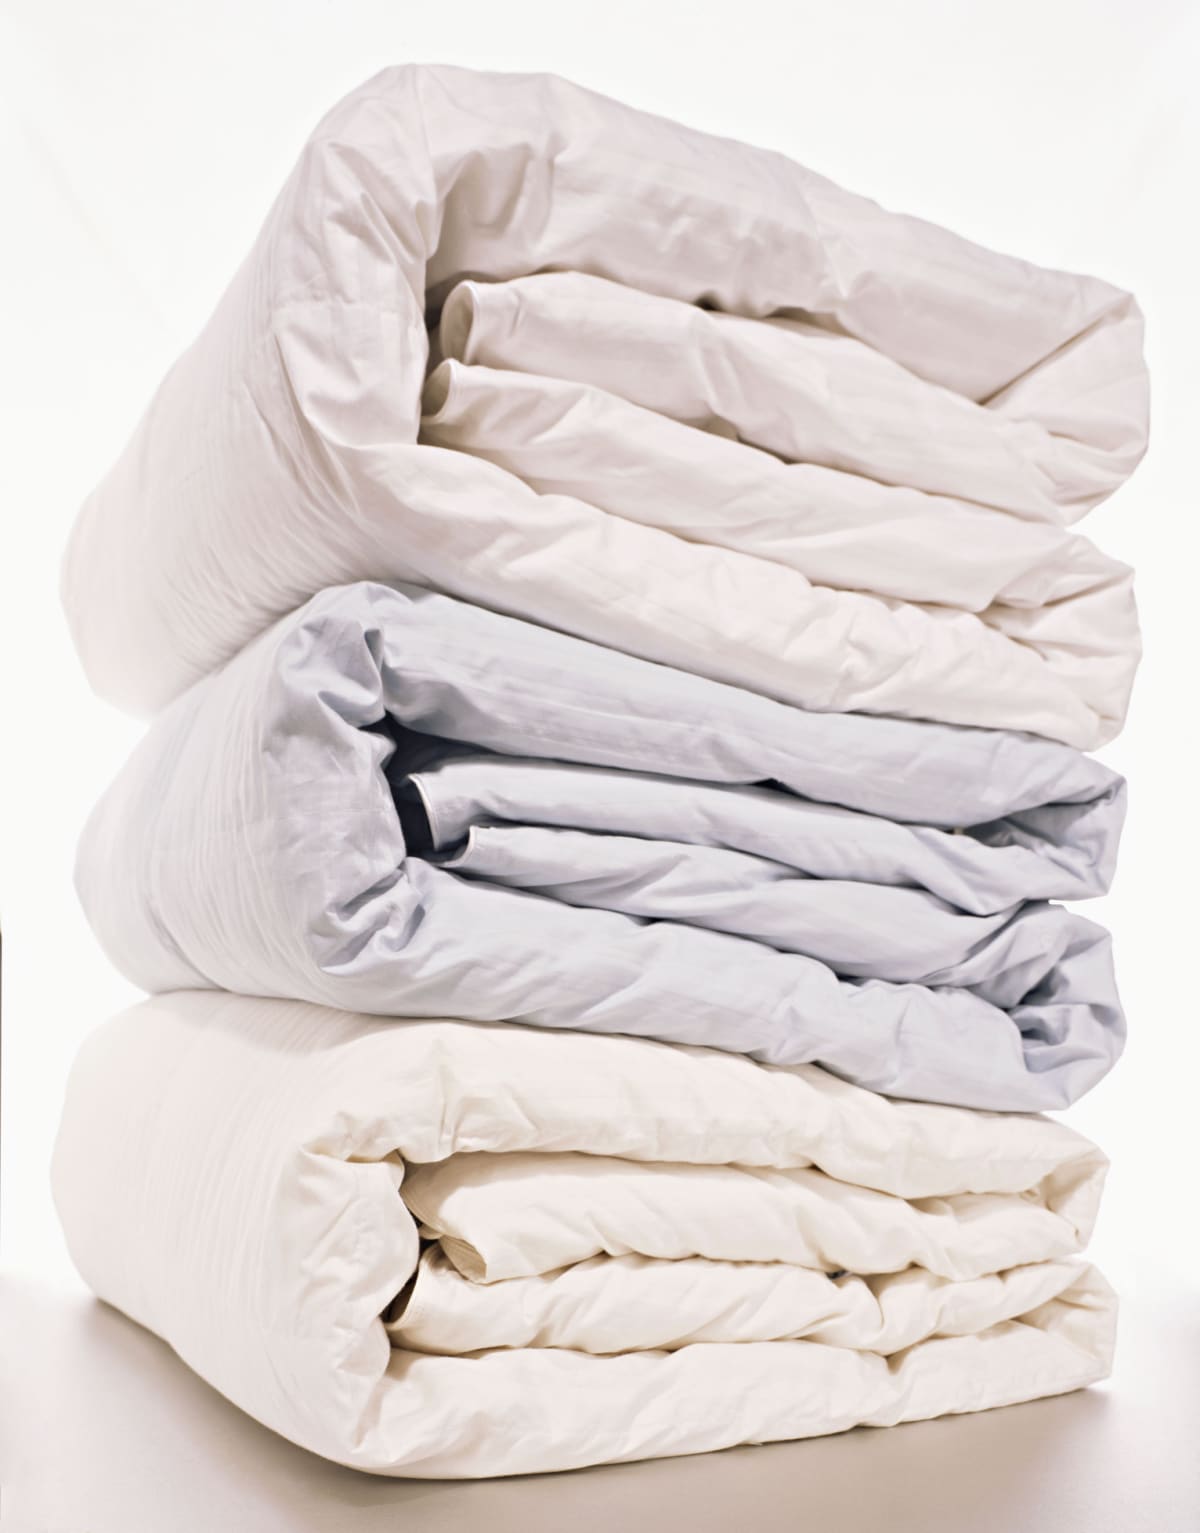 Stack of folded comforters